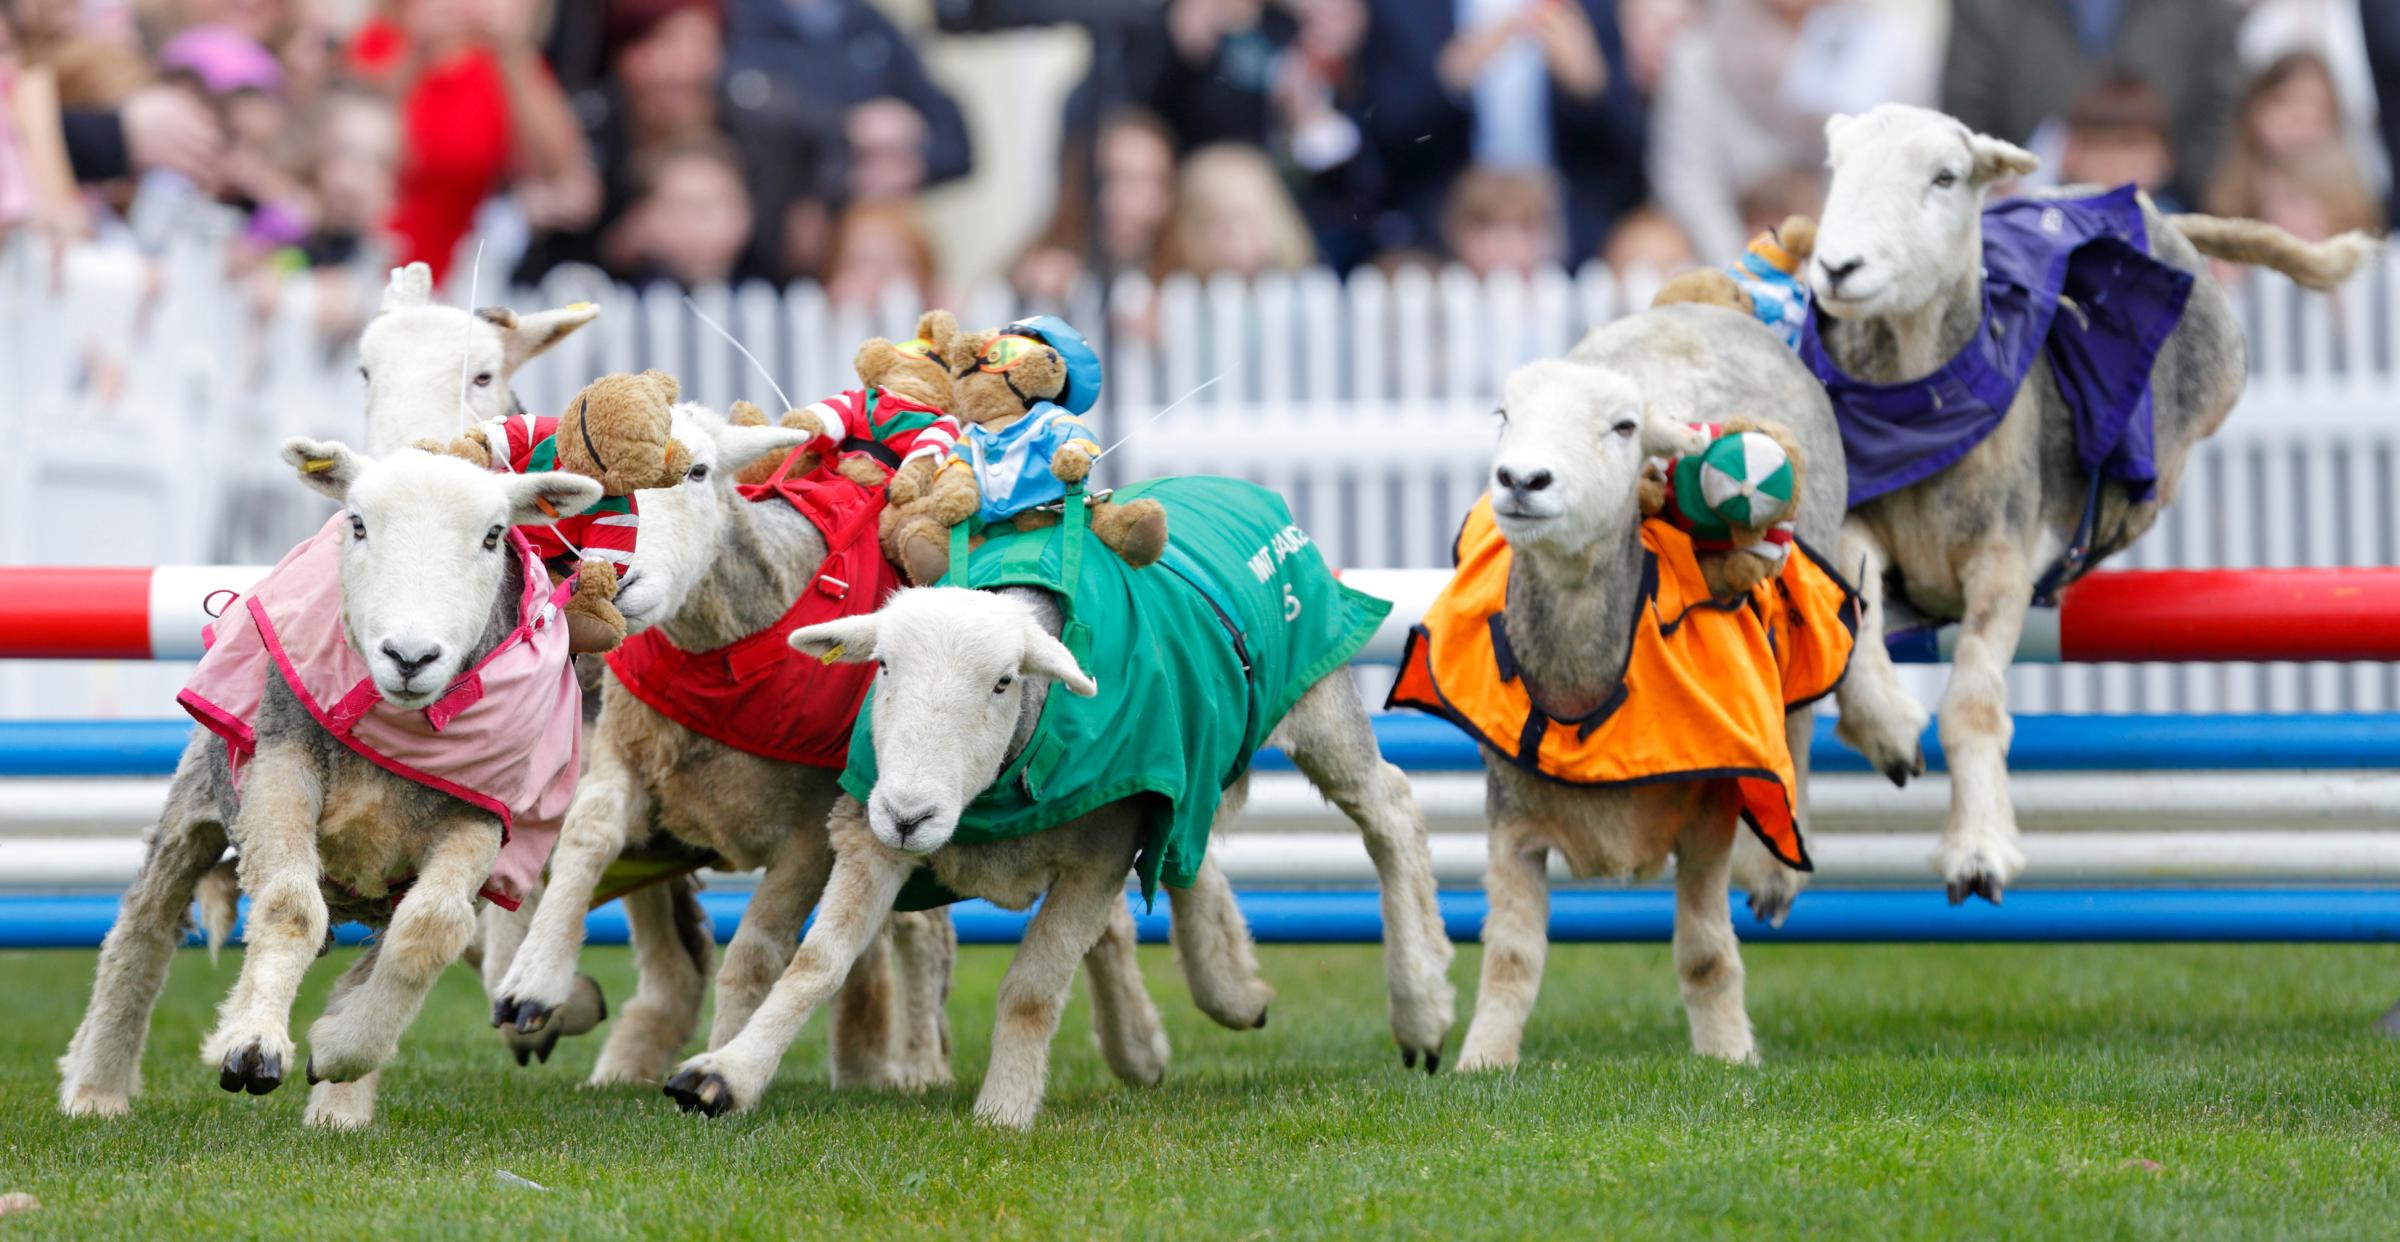 Sheep take part in the "Lamb National" race during the Prince's Countryside Fund Raceday at Ascot Racecourse in Ascot, England, on April 3, 2016.